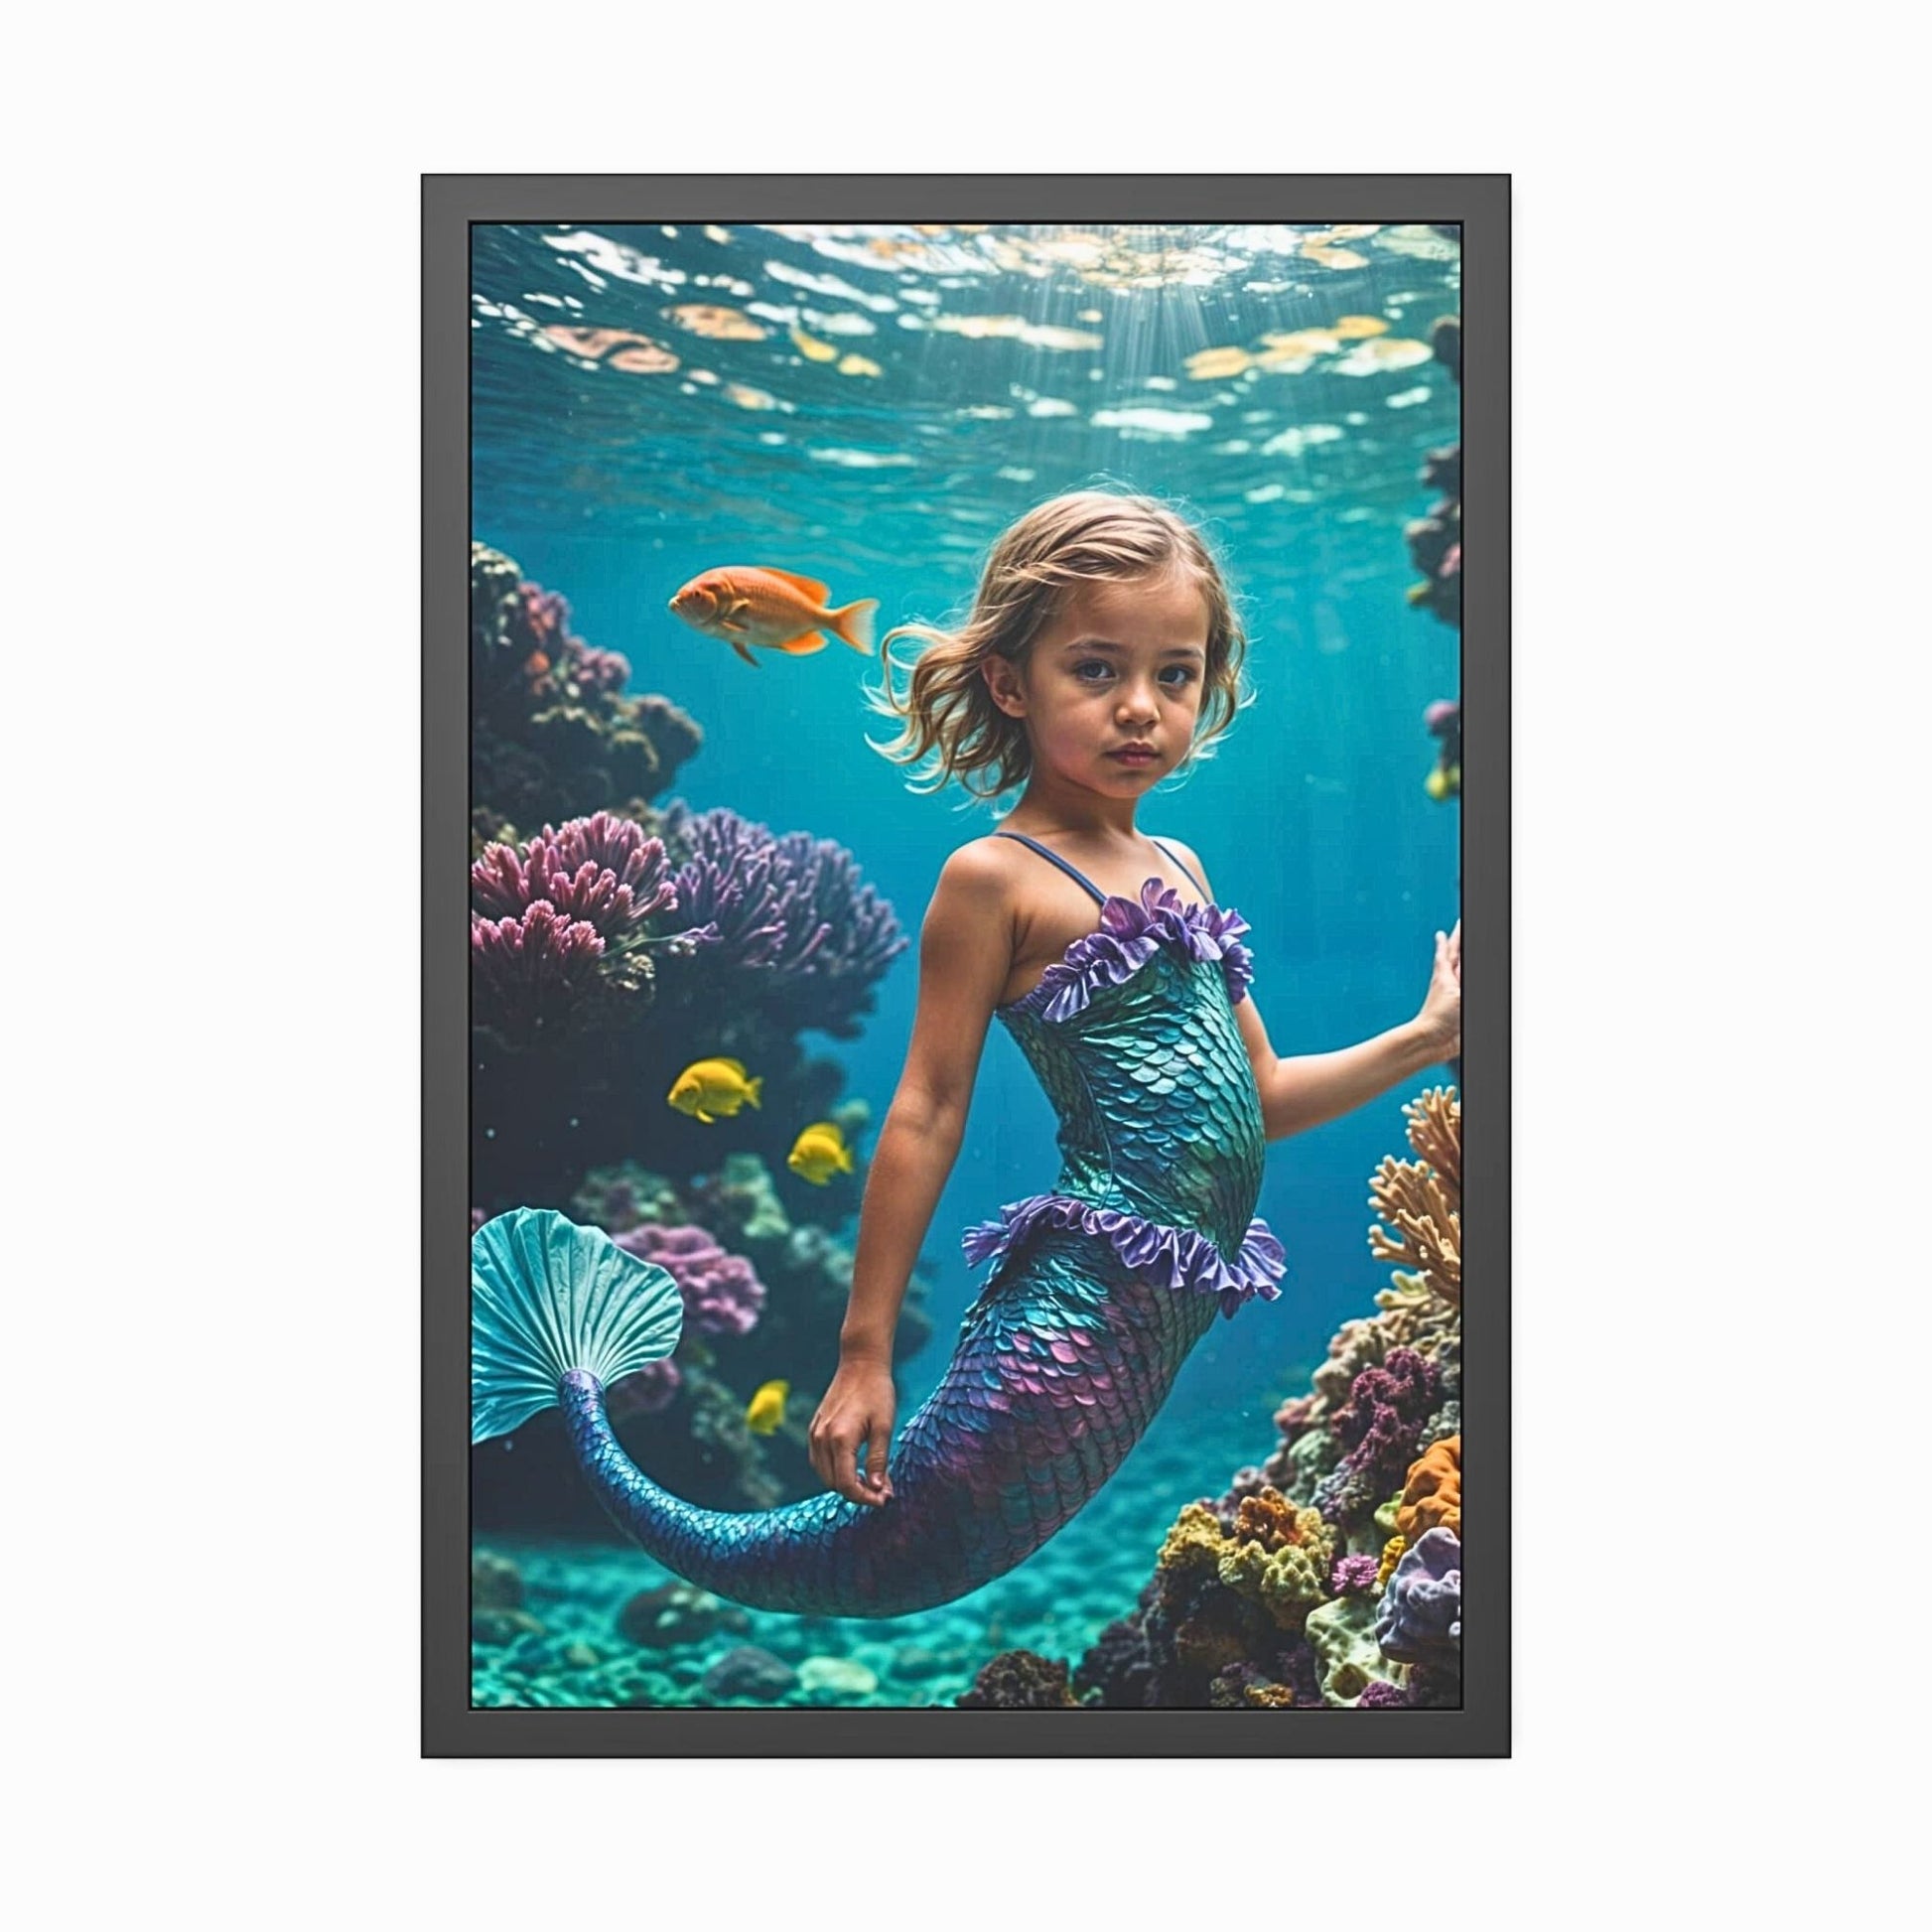 Capture the enchantment of the sea with our Custom Mermaid Portrait from Photo service. Surprise your daughter with a Personalized Princess Mermaid Portrait for her Birthday. Elevate your décor with our exquisite Wall Art options. The perfect gift for daughters, sisters, and moms alike. Create lasting memories with our Custom Mermaid Art portraits.